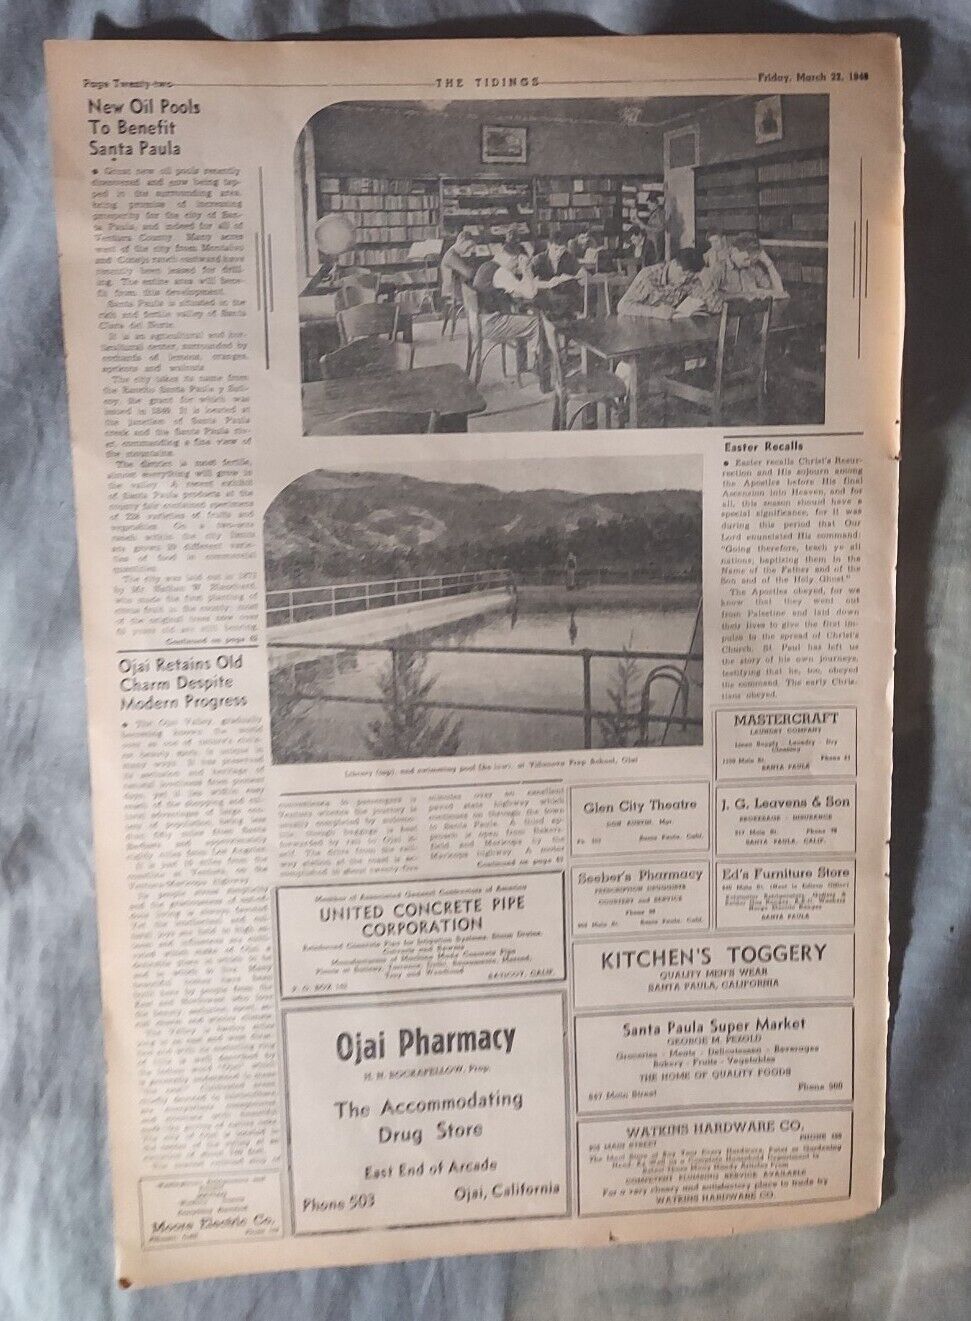 1940* articles-Oil Discovery to benefit Santa Paula/Ojai Retains Old Charm + ads